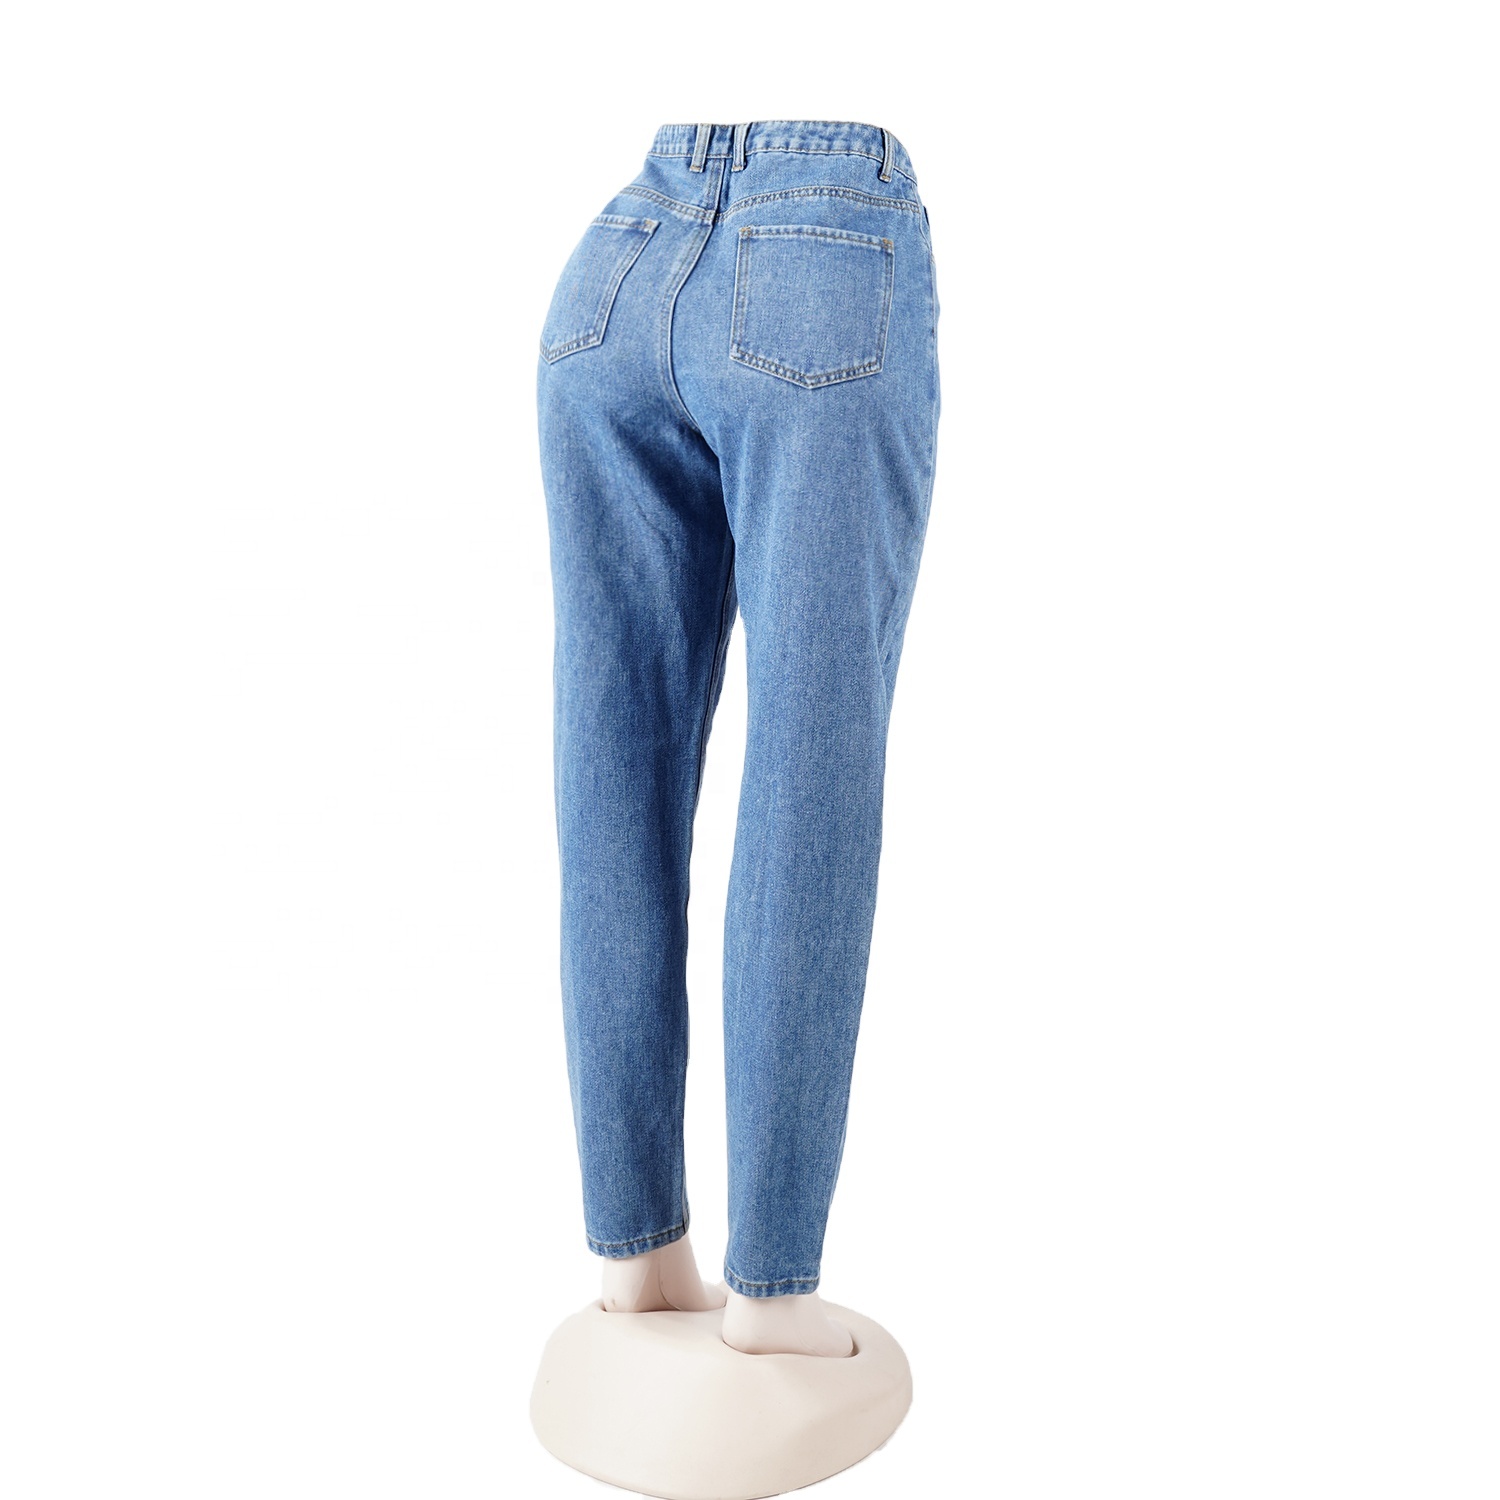 SKYKINGDOM new arrival blue jeans comfy mid waisted 100 cotton bell bottom flare long women jeans